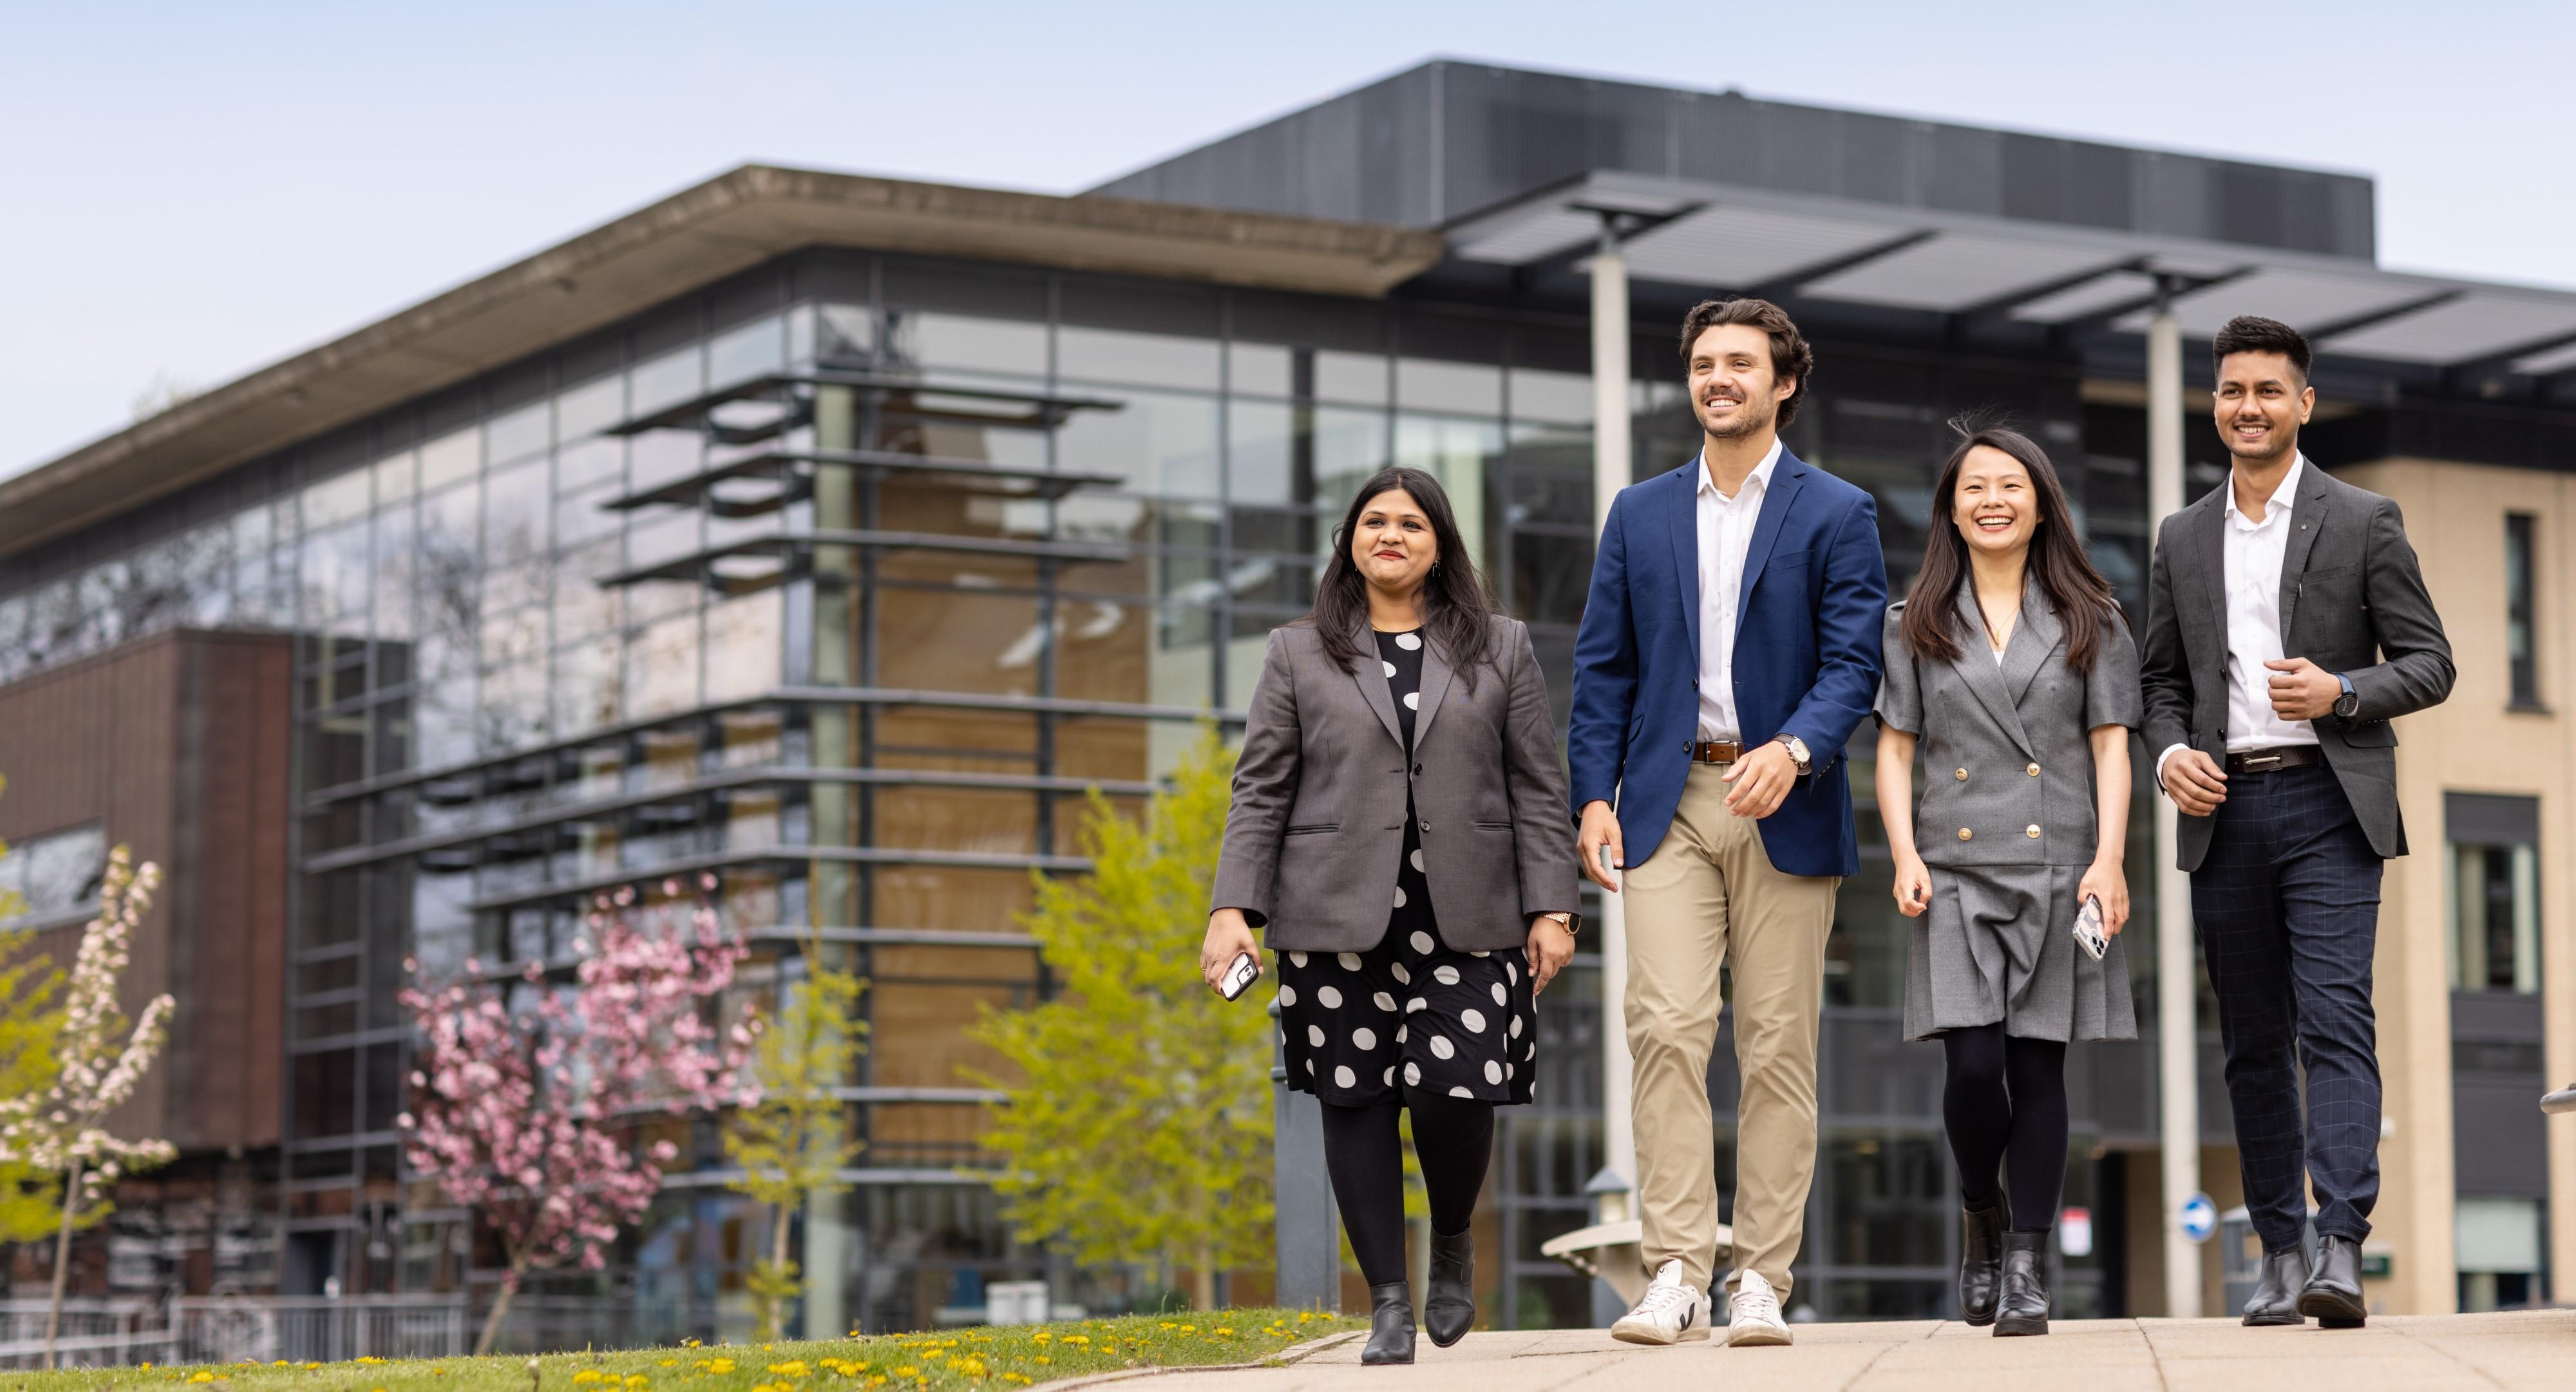 Four students walking in front of a modern building